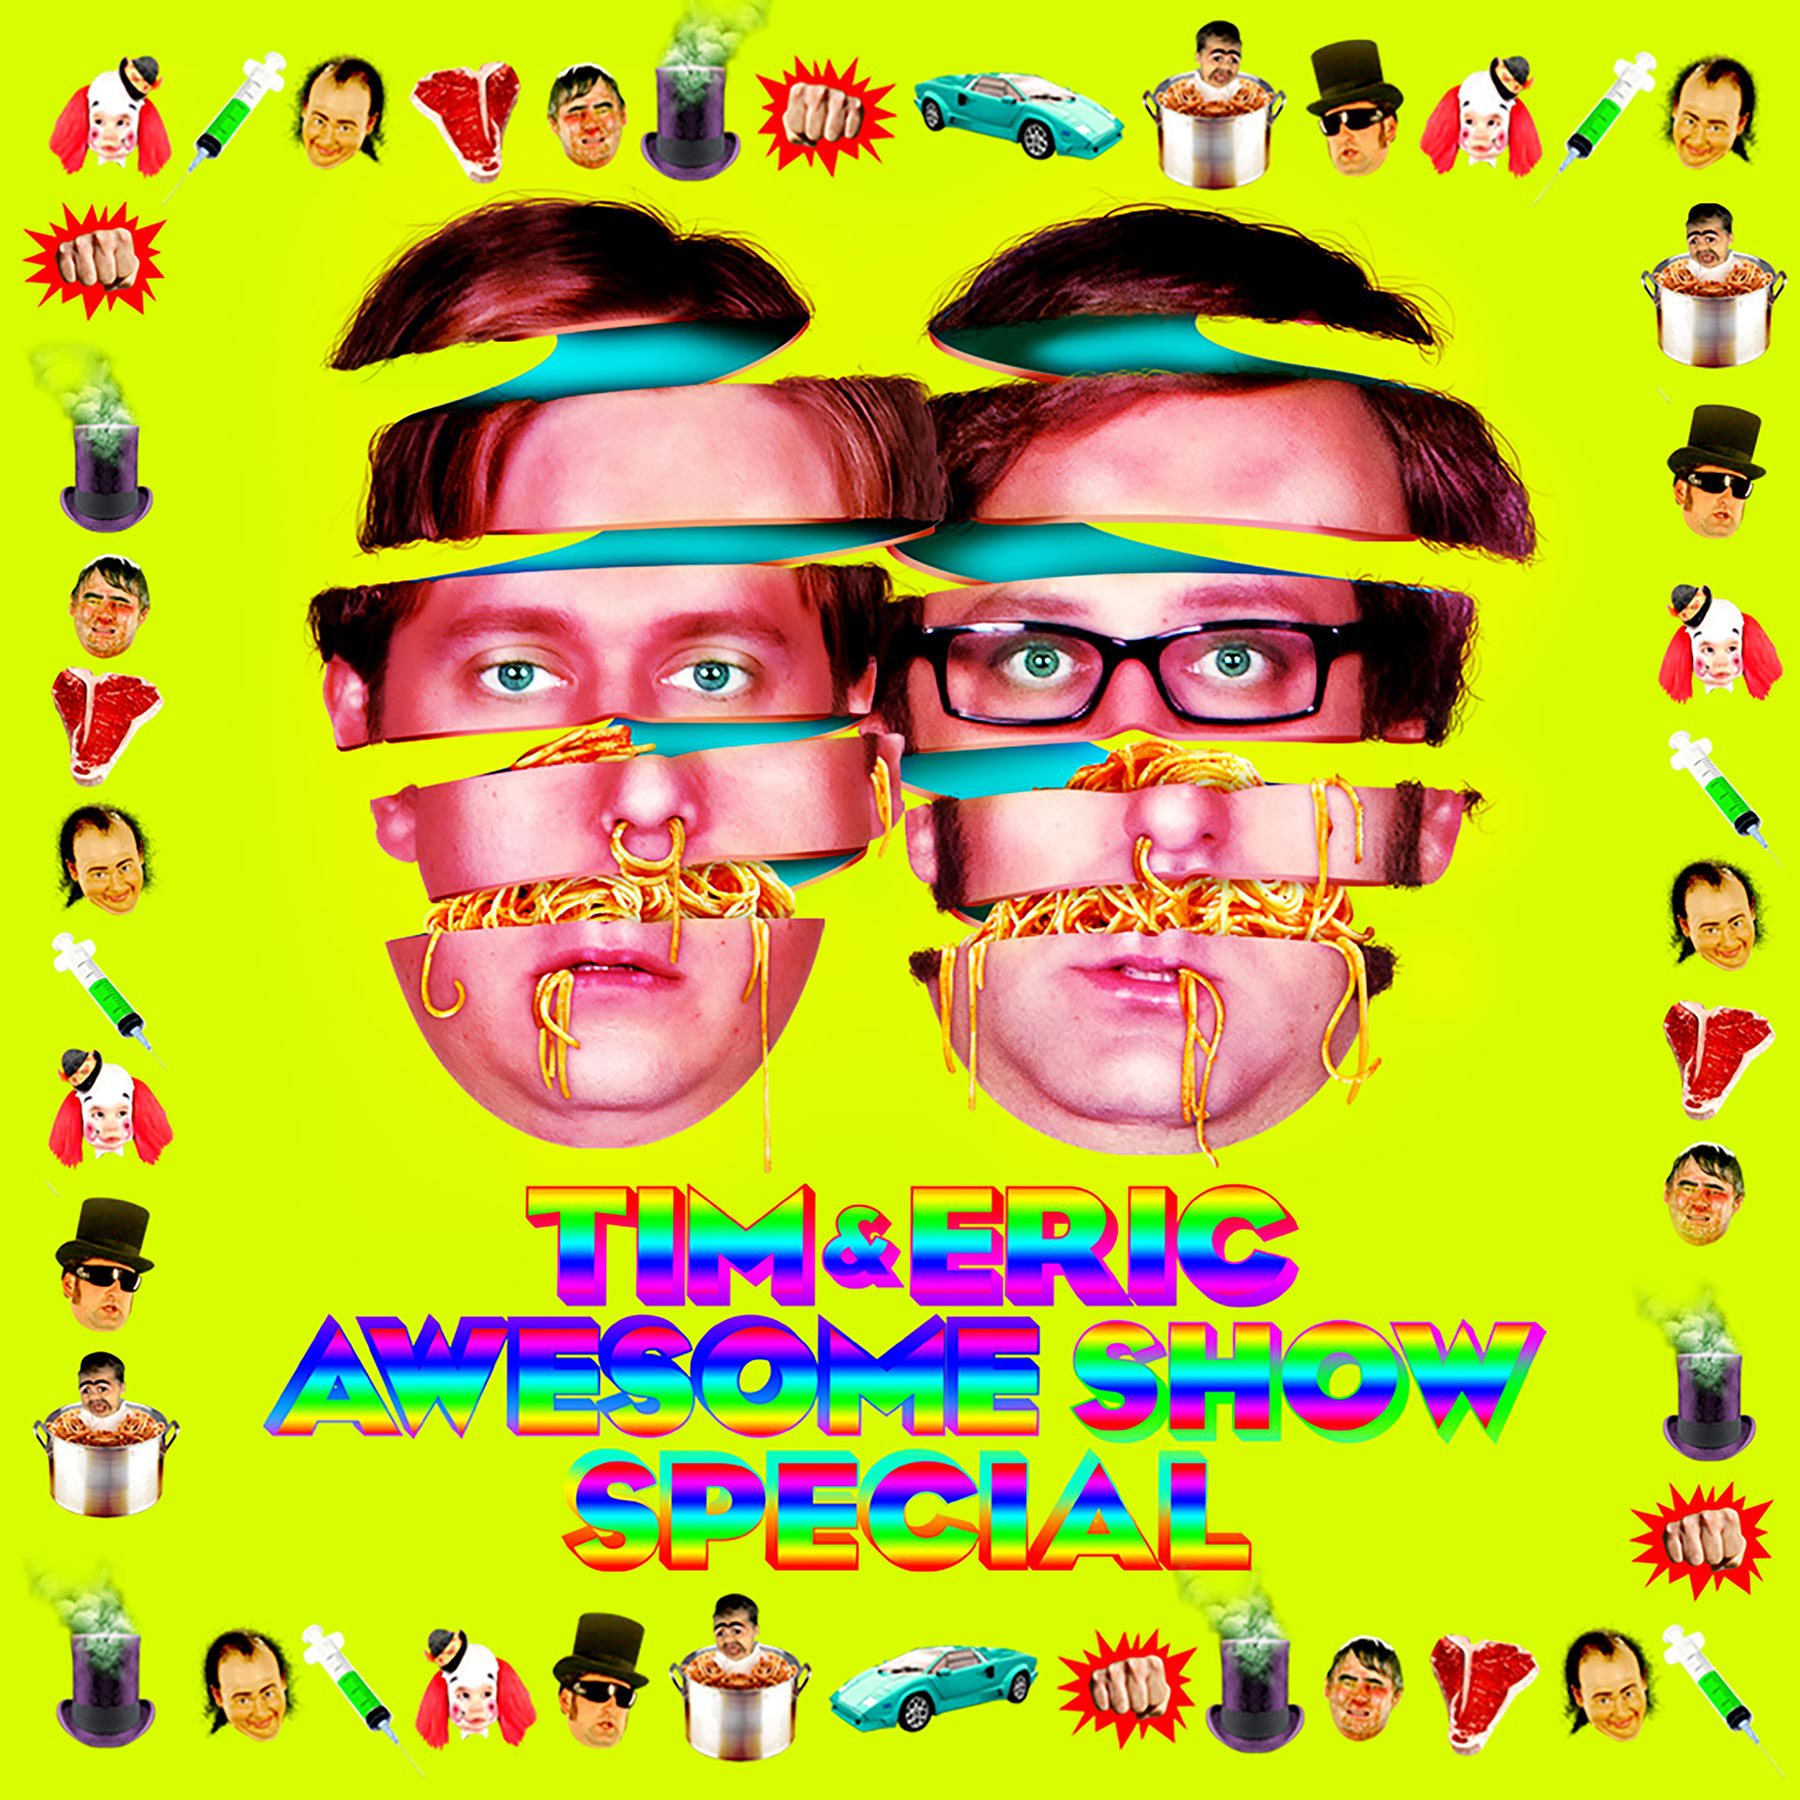 A <i>Tim and Eric Awesome Show, Great Job!</i> 10th Anniversary Special Is Coming to Adult Swim” title=”teasr_image2-1502393128″ data-original-id=”253114″ data-adjusted-id=”253114″ class=”sm_size_full_width sm_alignment_center ” data-image-source=”video_screenshot” /></p>
</p><p>To see our running list of the top 100 greatest rock stars of all time, <a href=